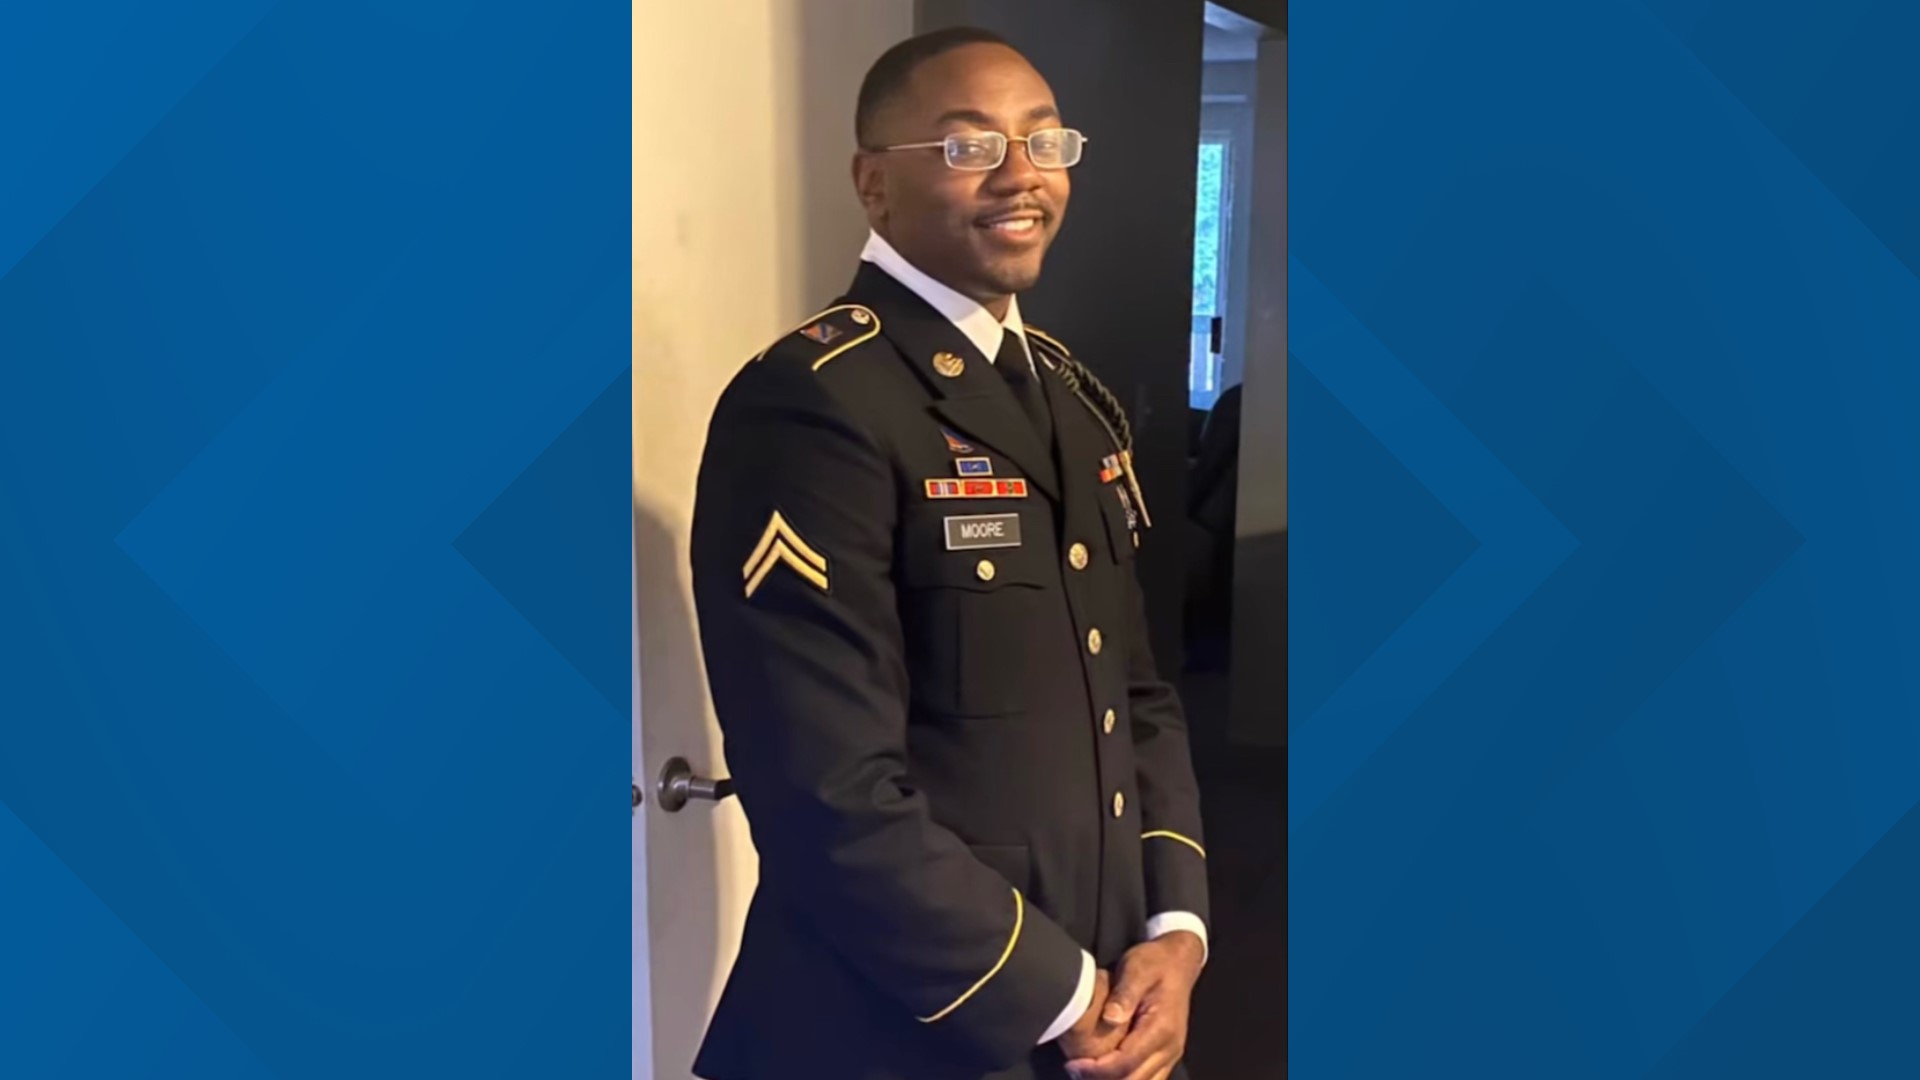 Emmett Moore was a sergeant at Joint Base Lewis-McChord. The active-duty soldier, originally from East Point, was shot at a house party in Parkland, Washington.